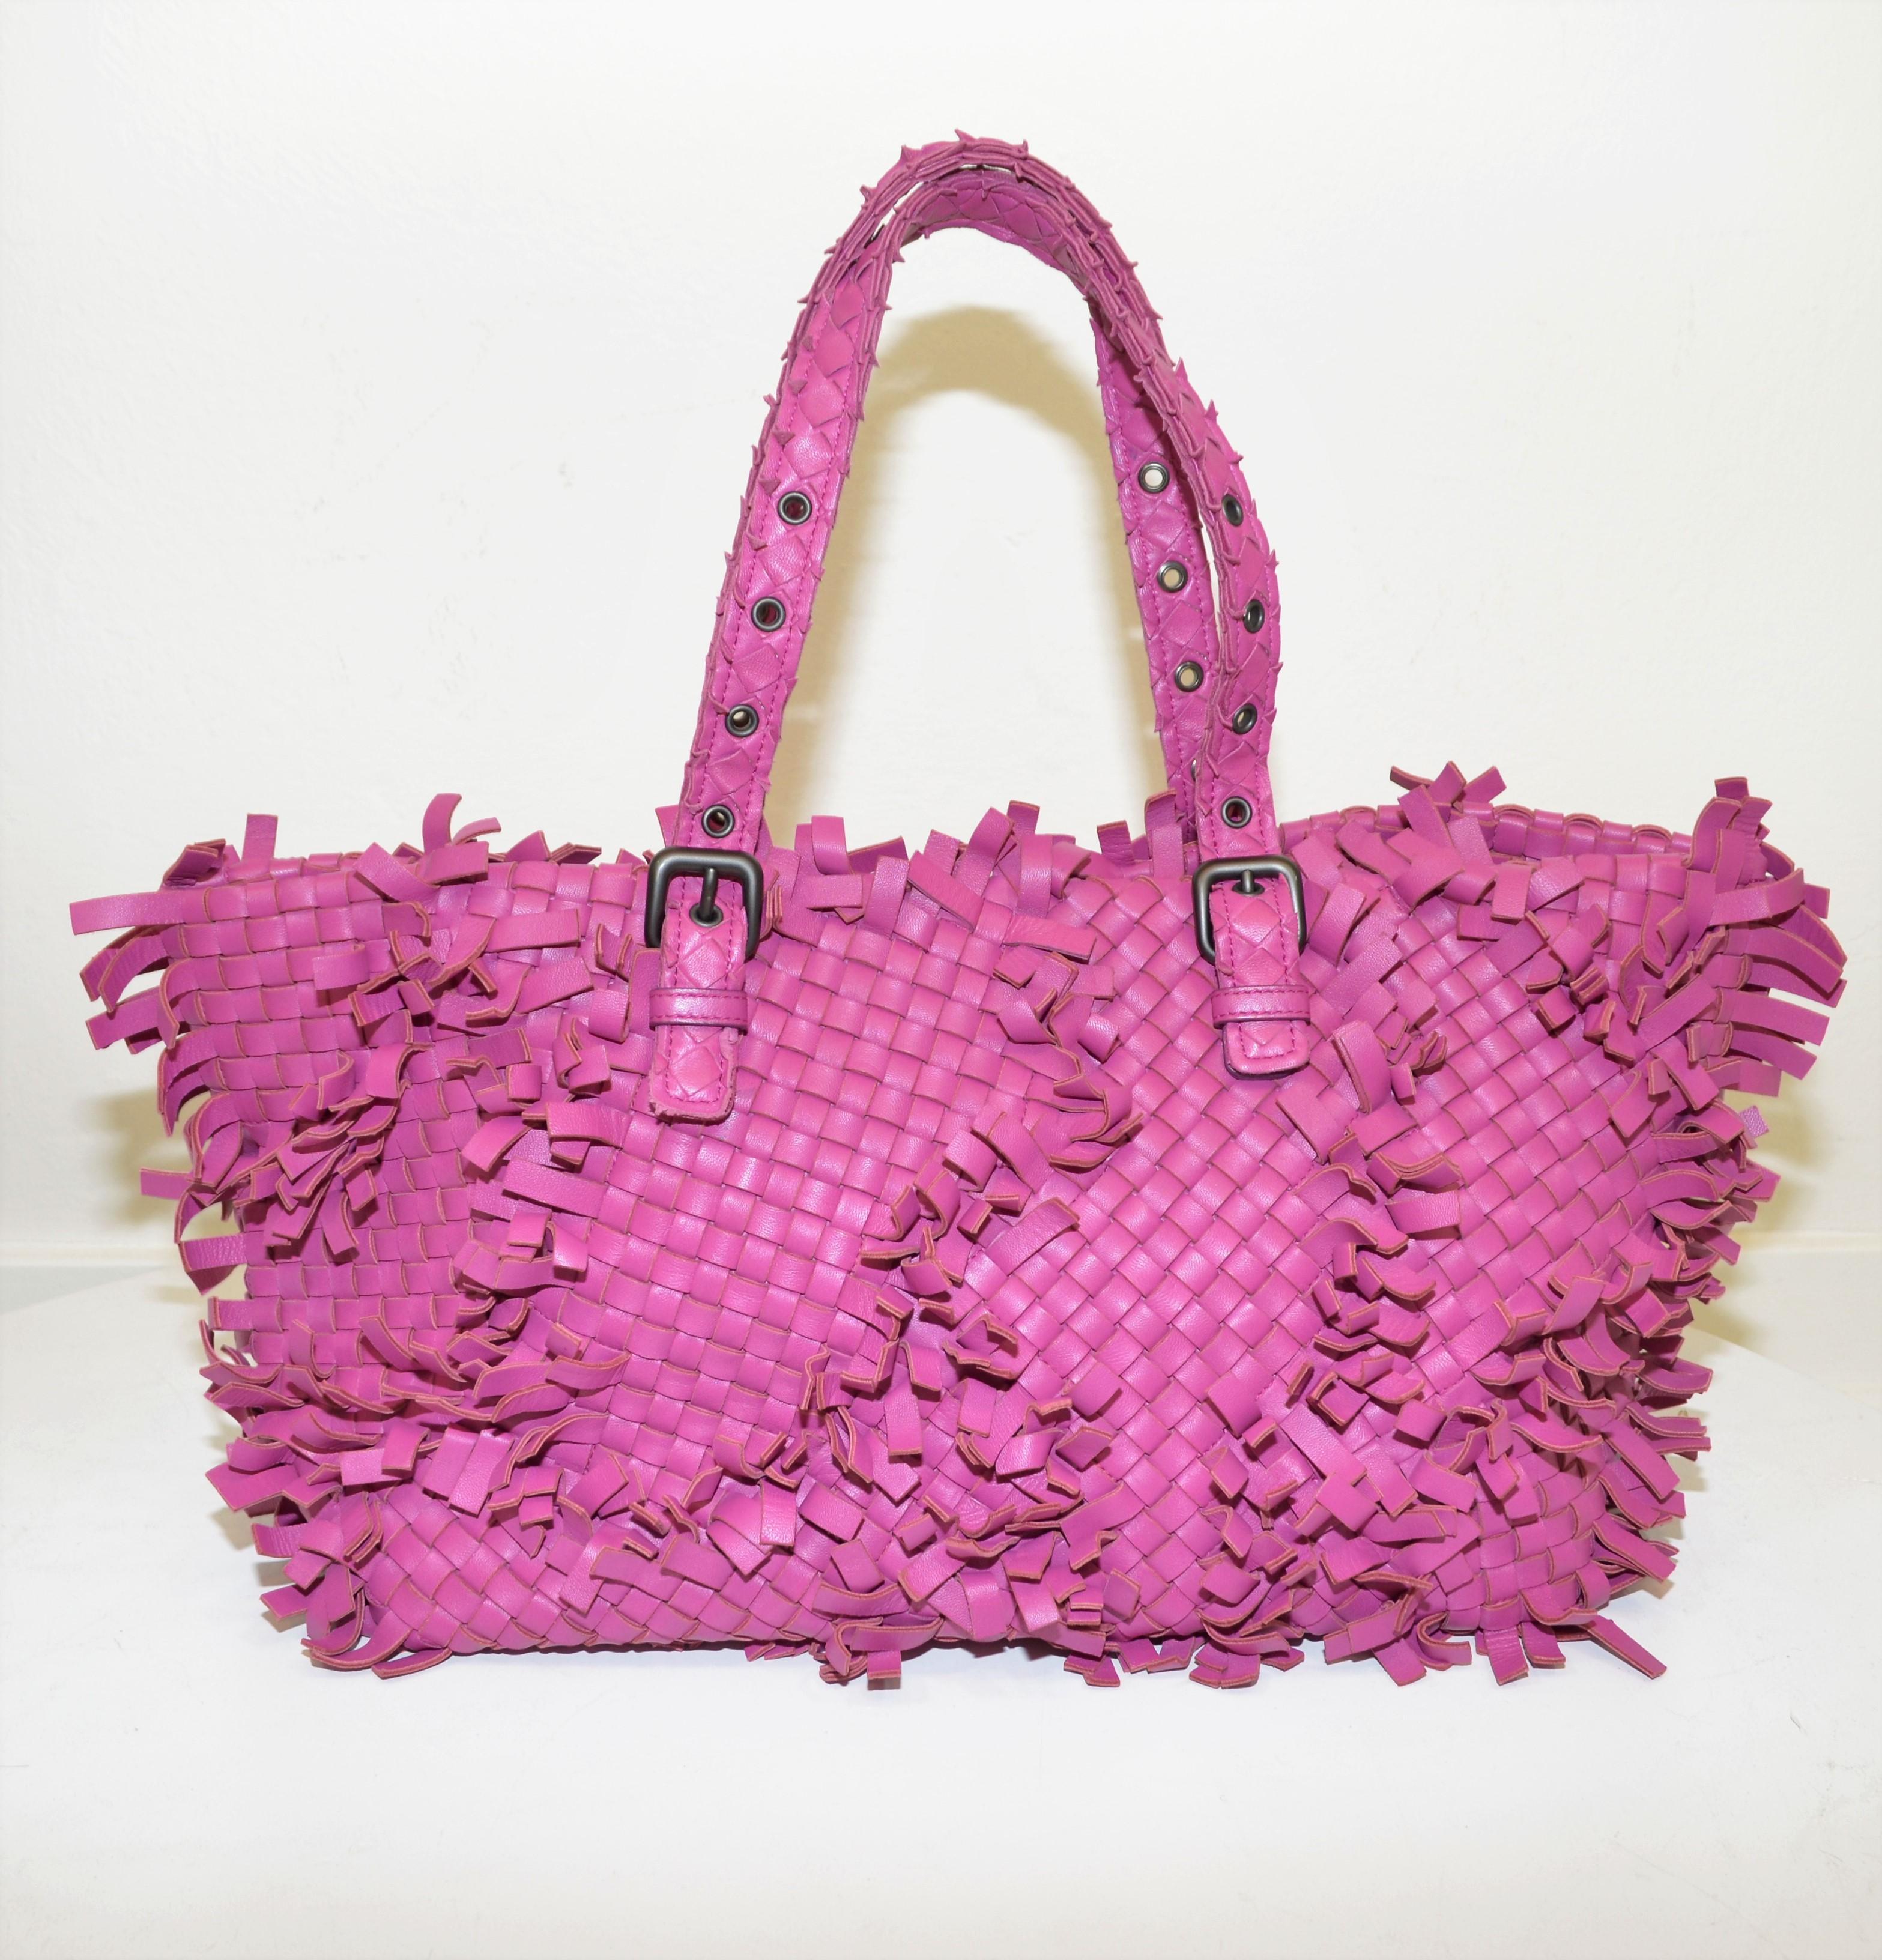 Bottega Veneta tote featured in a raspberry color with fringed leather and an open top. Tote has two adjustable handles attached by gunmetal hardware. Full suede interior lining with one slip pocket and one zippered pocket. Hand mirror is included.